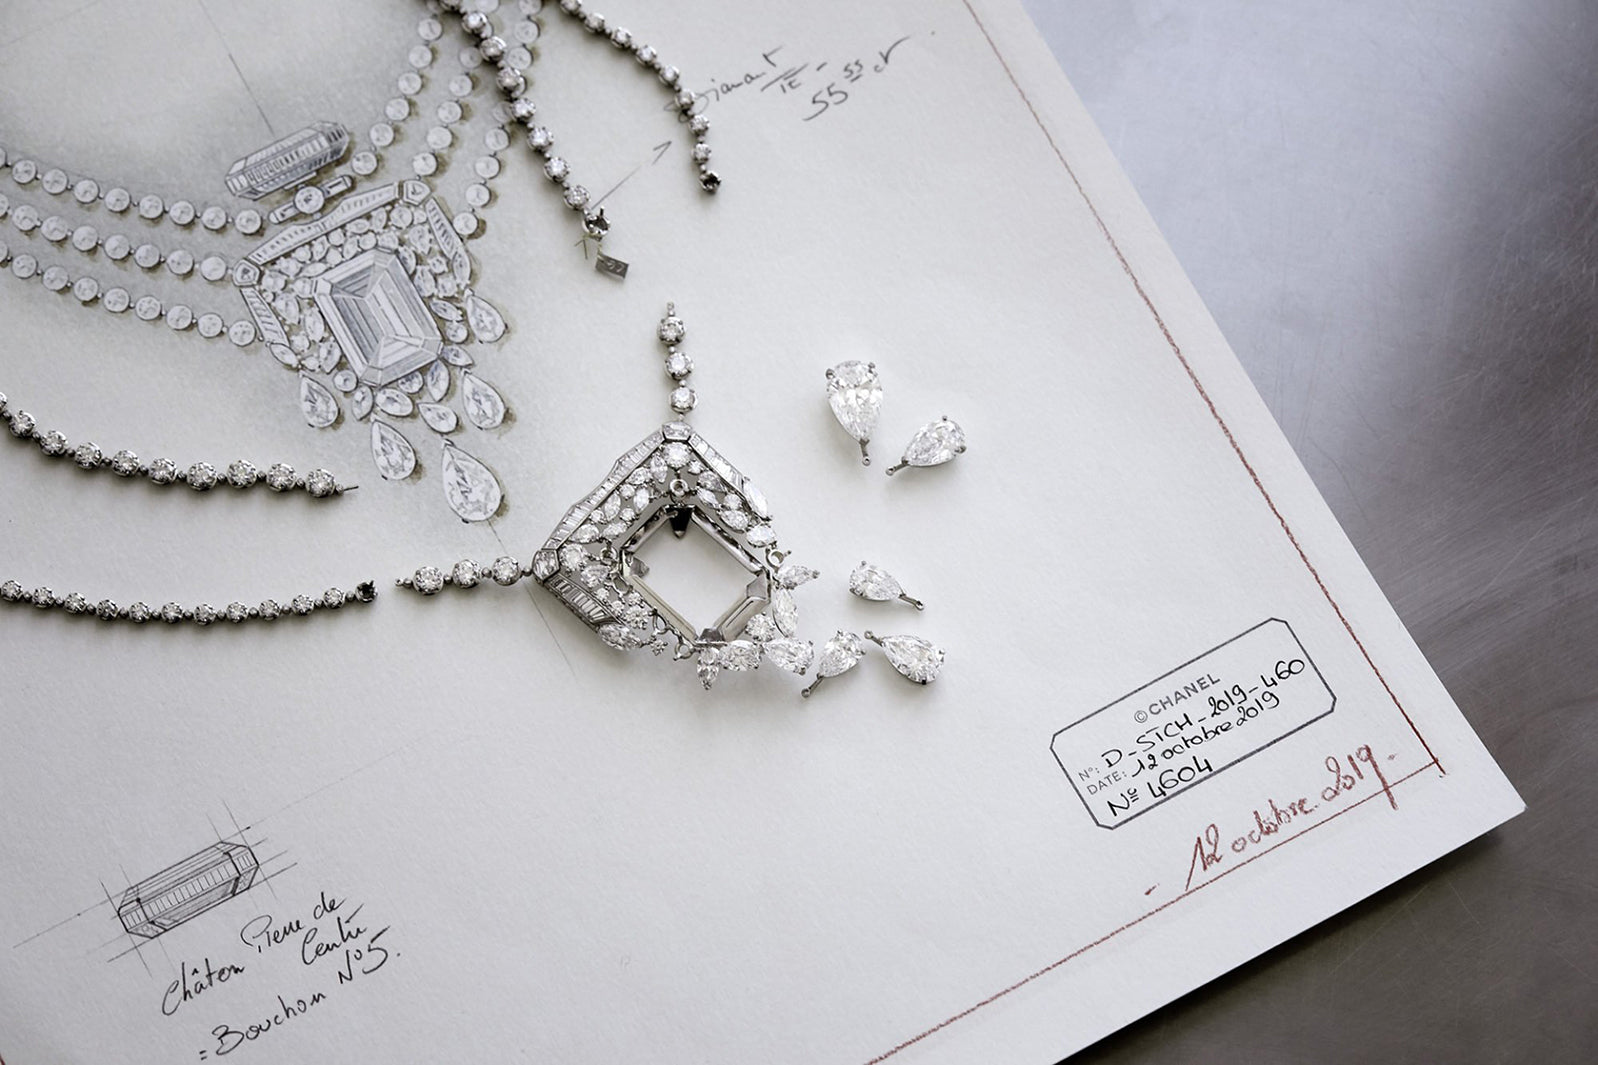 A 55.55 carat diamond: the 100th years of N°5 Chanel